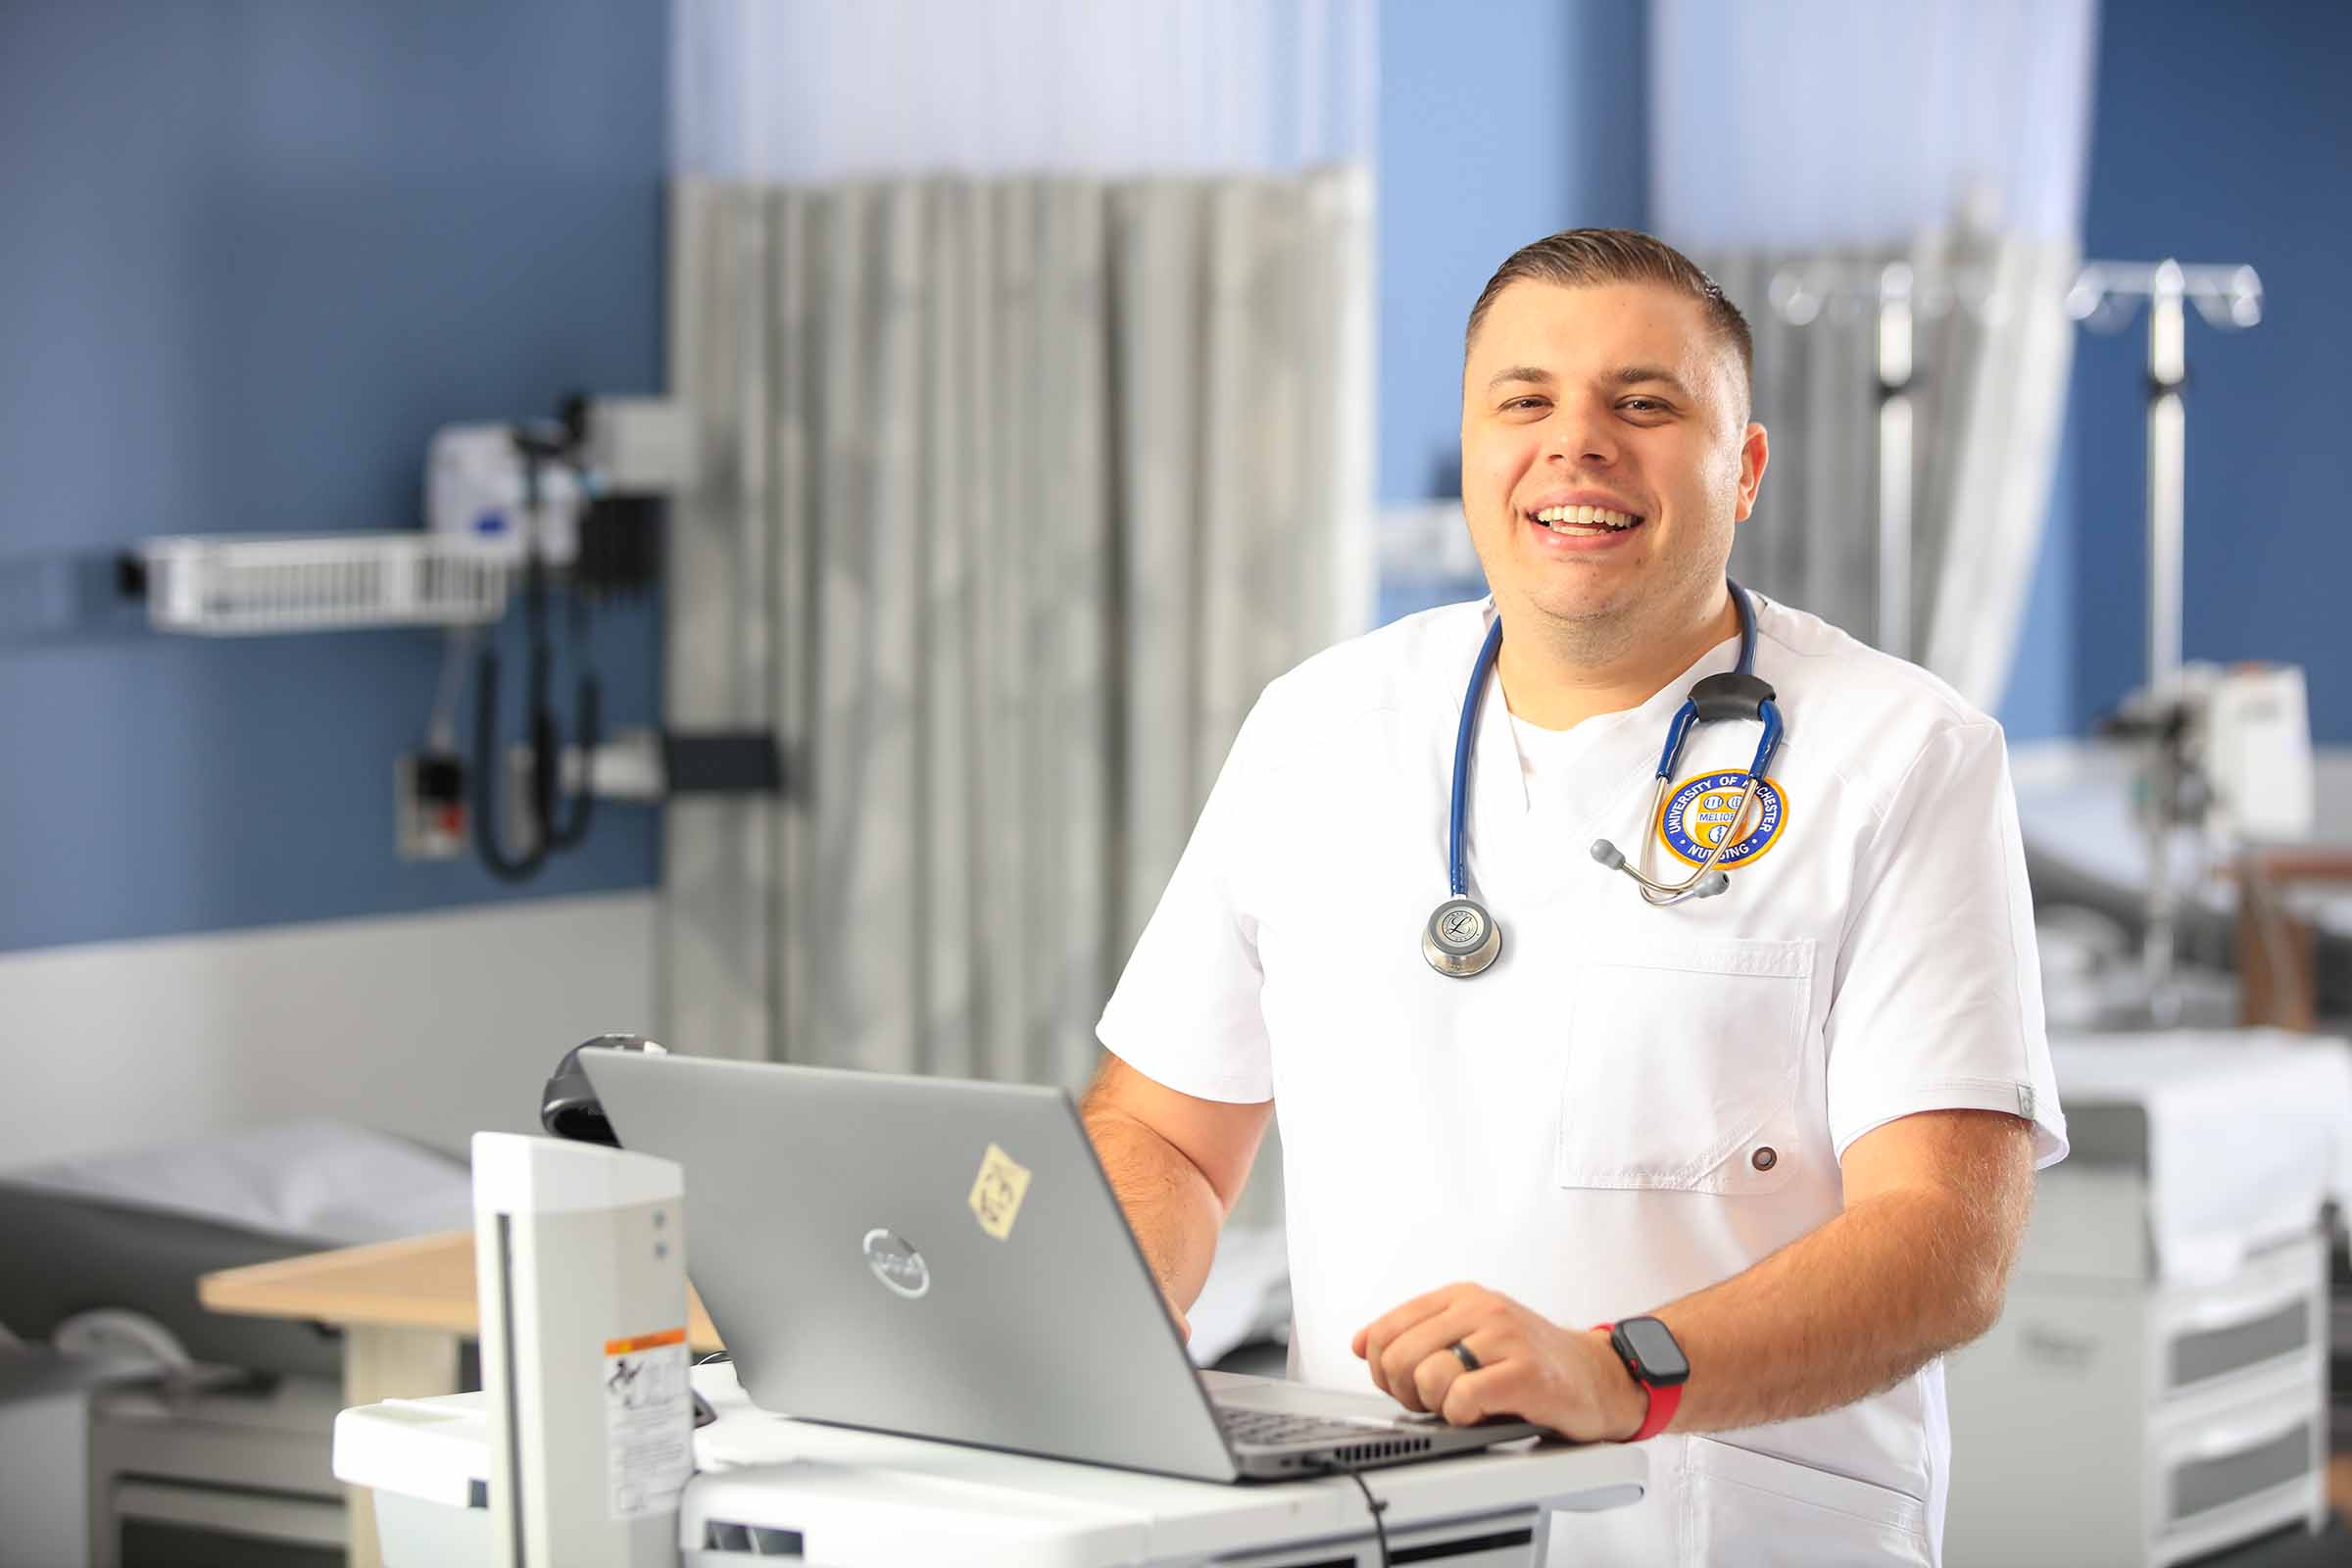 Cam Dove, nursing student, in white and blue nursing uniform, smiling at a camera